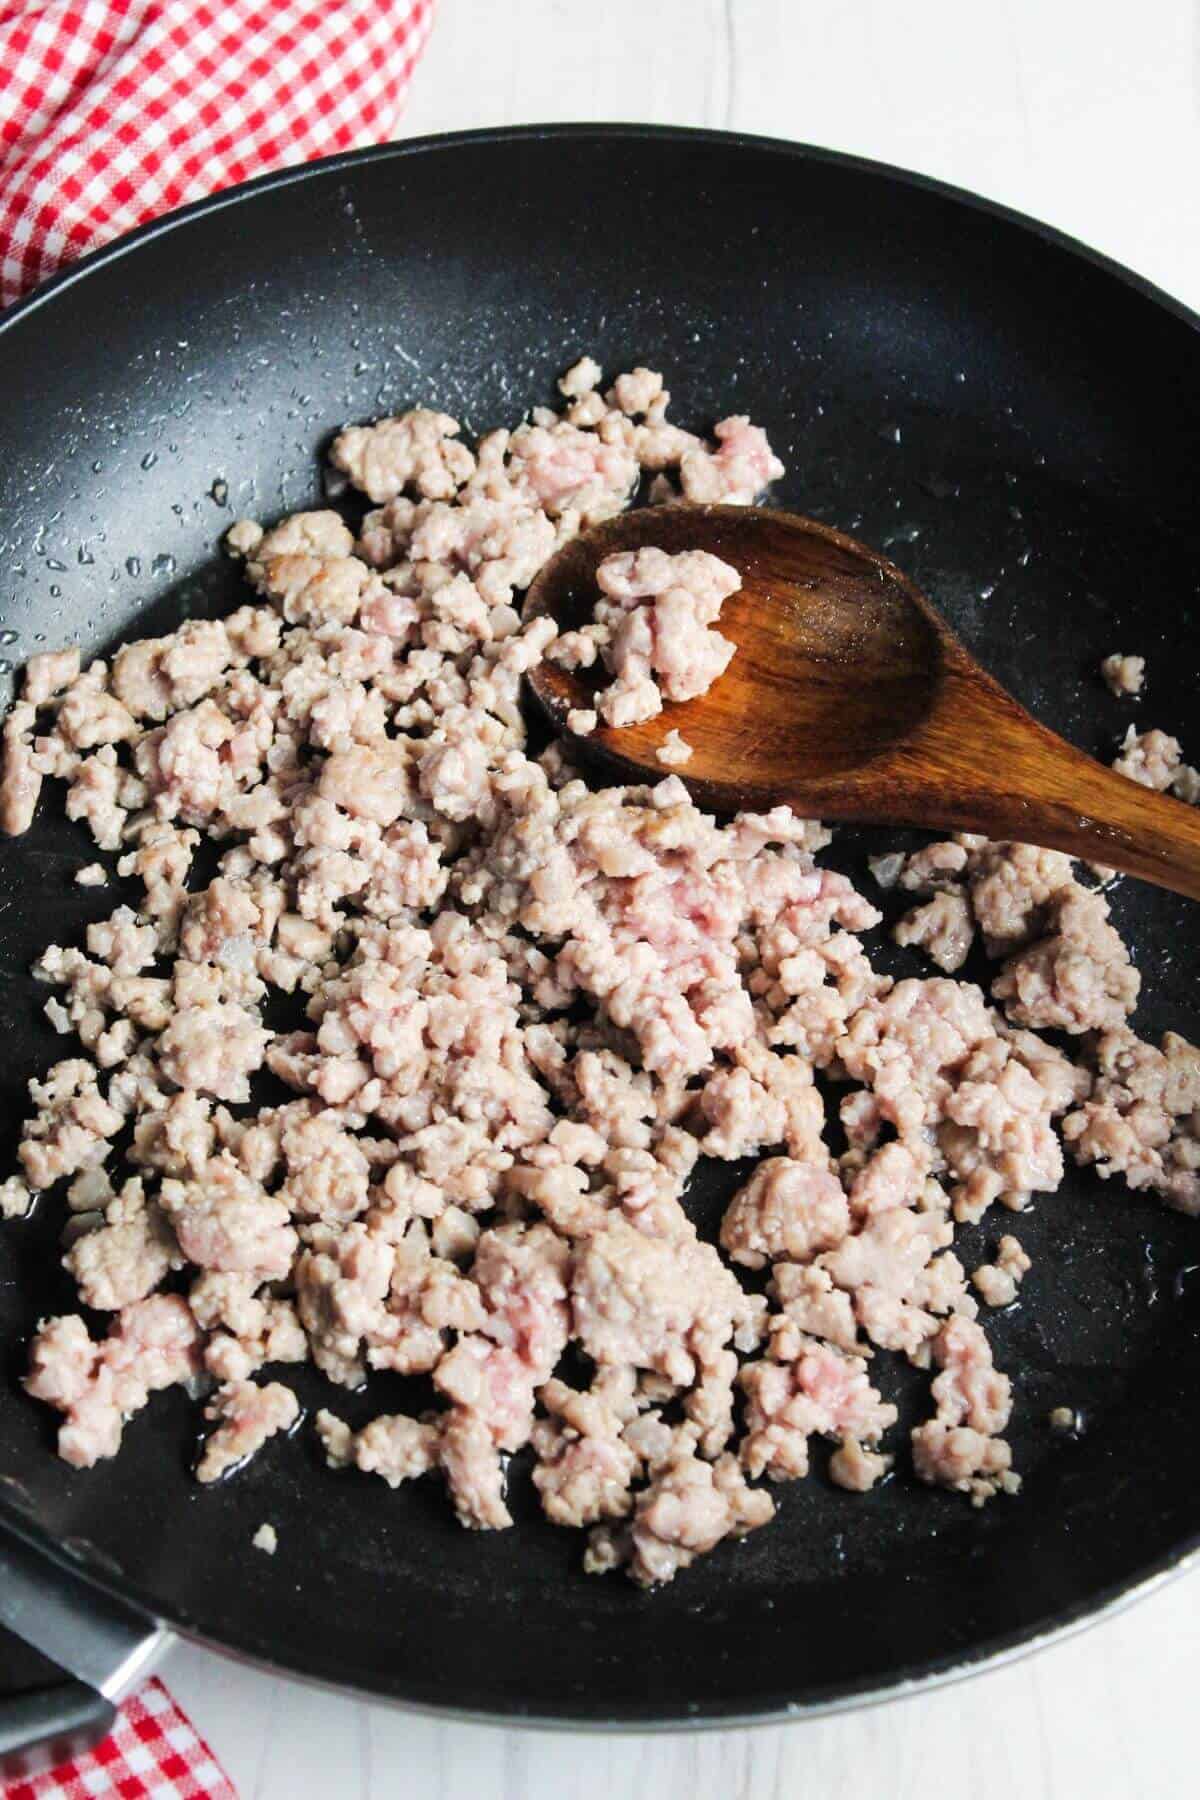 Ground beef in a frying pan with a wooden spoon.